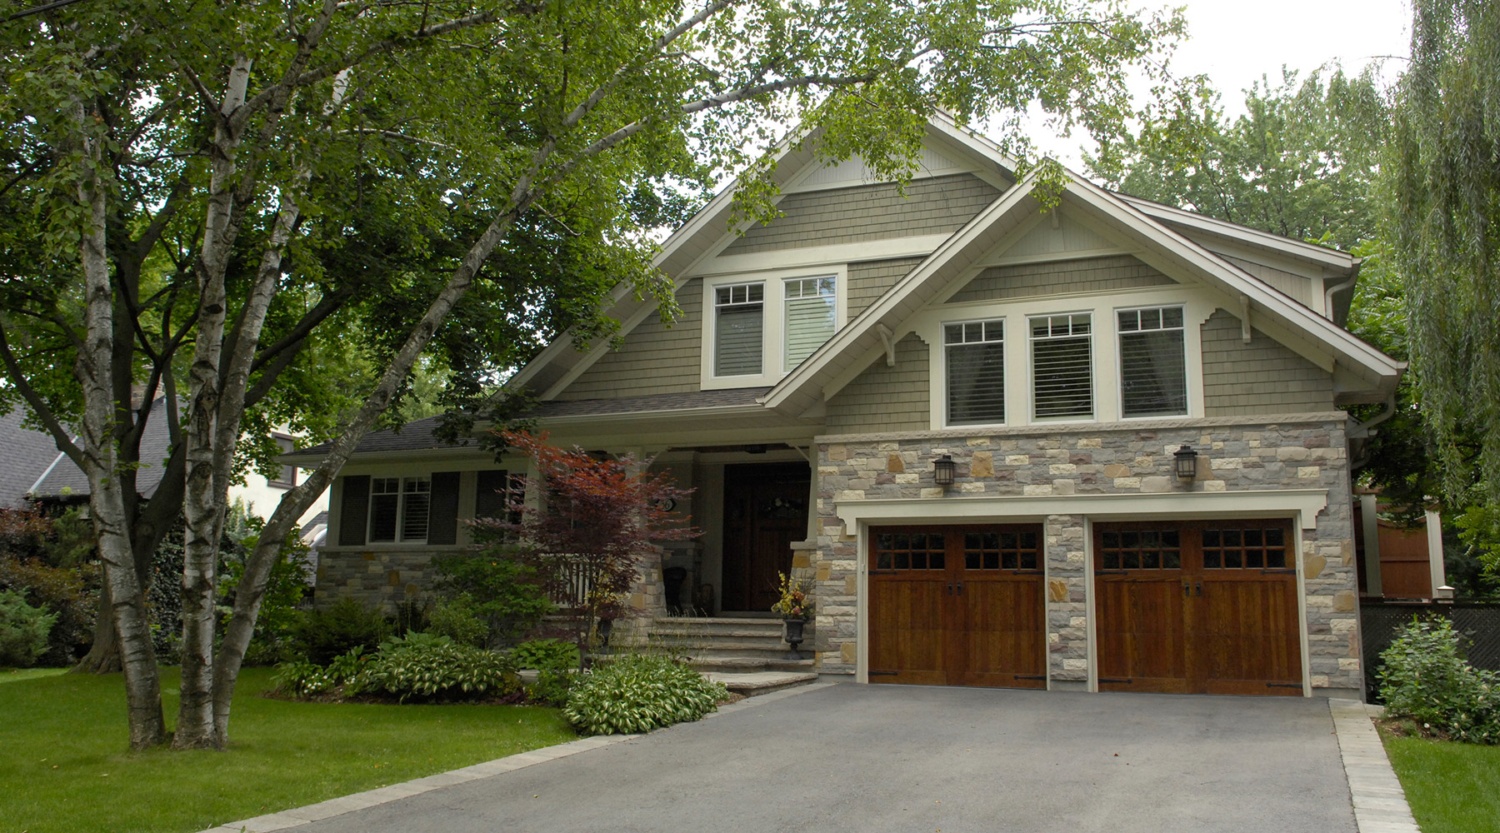 Home renovation with wood garage door, natural stone and white trim.